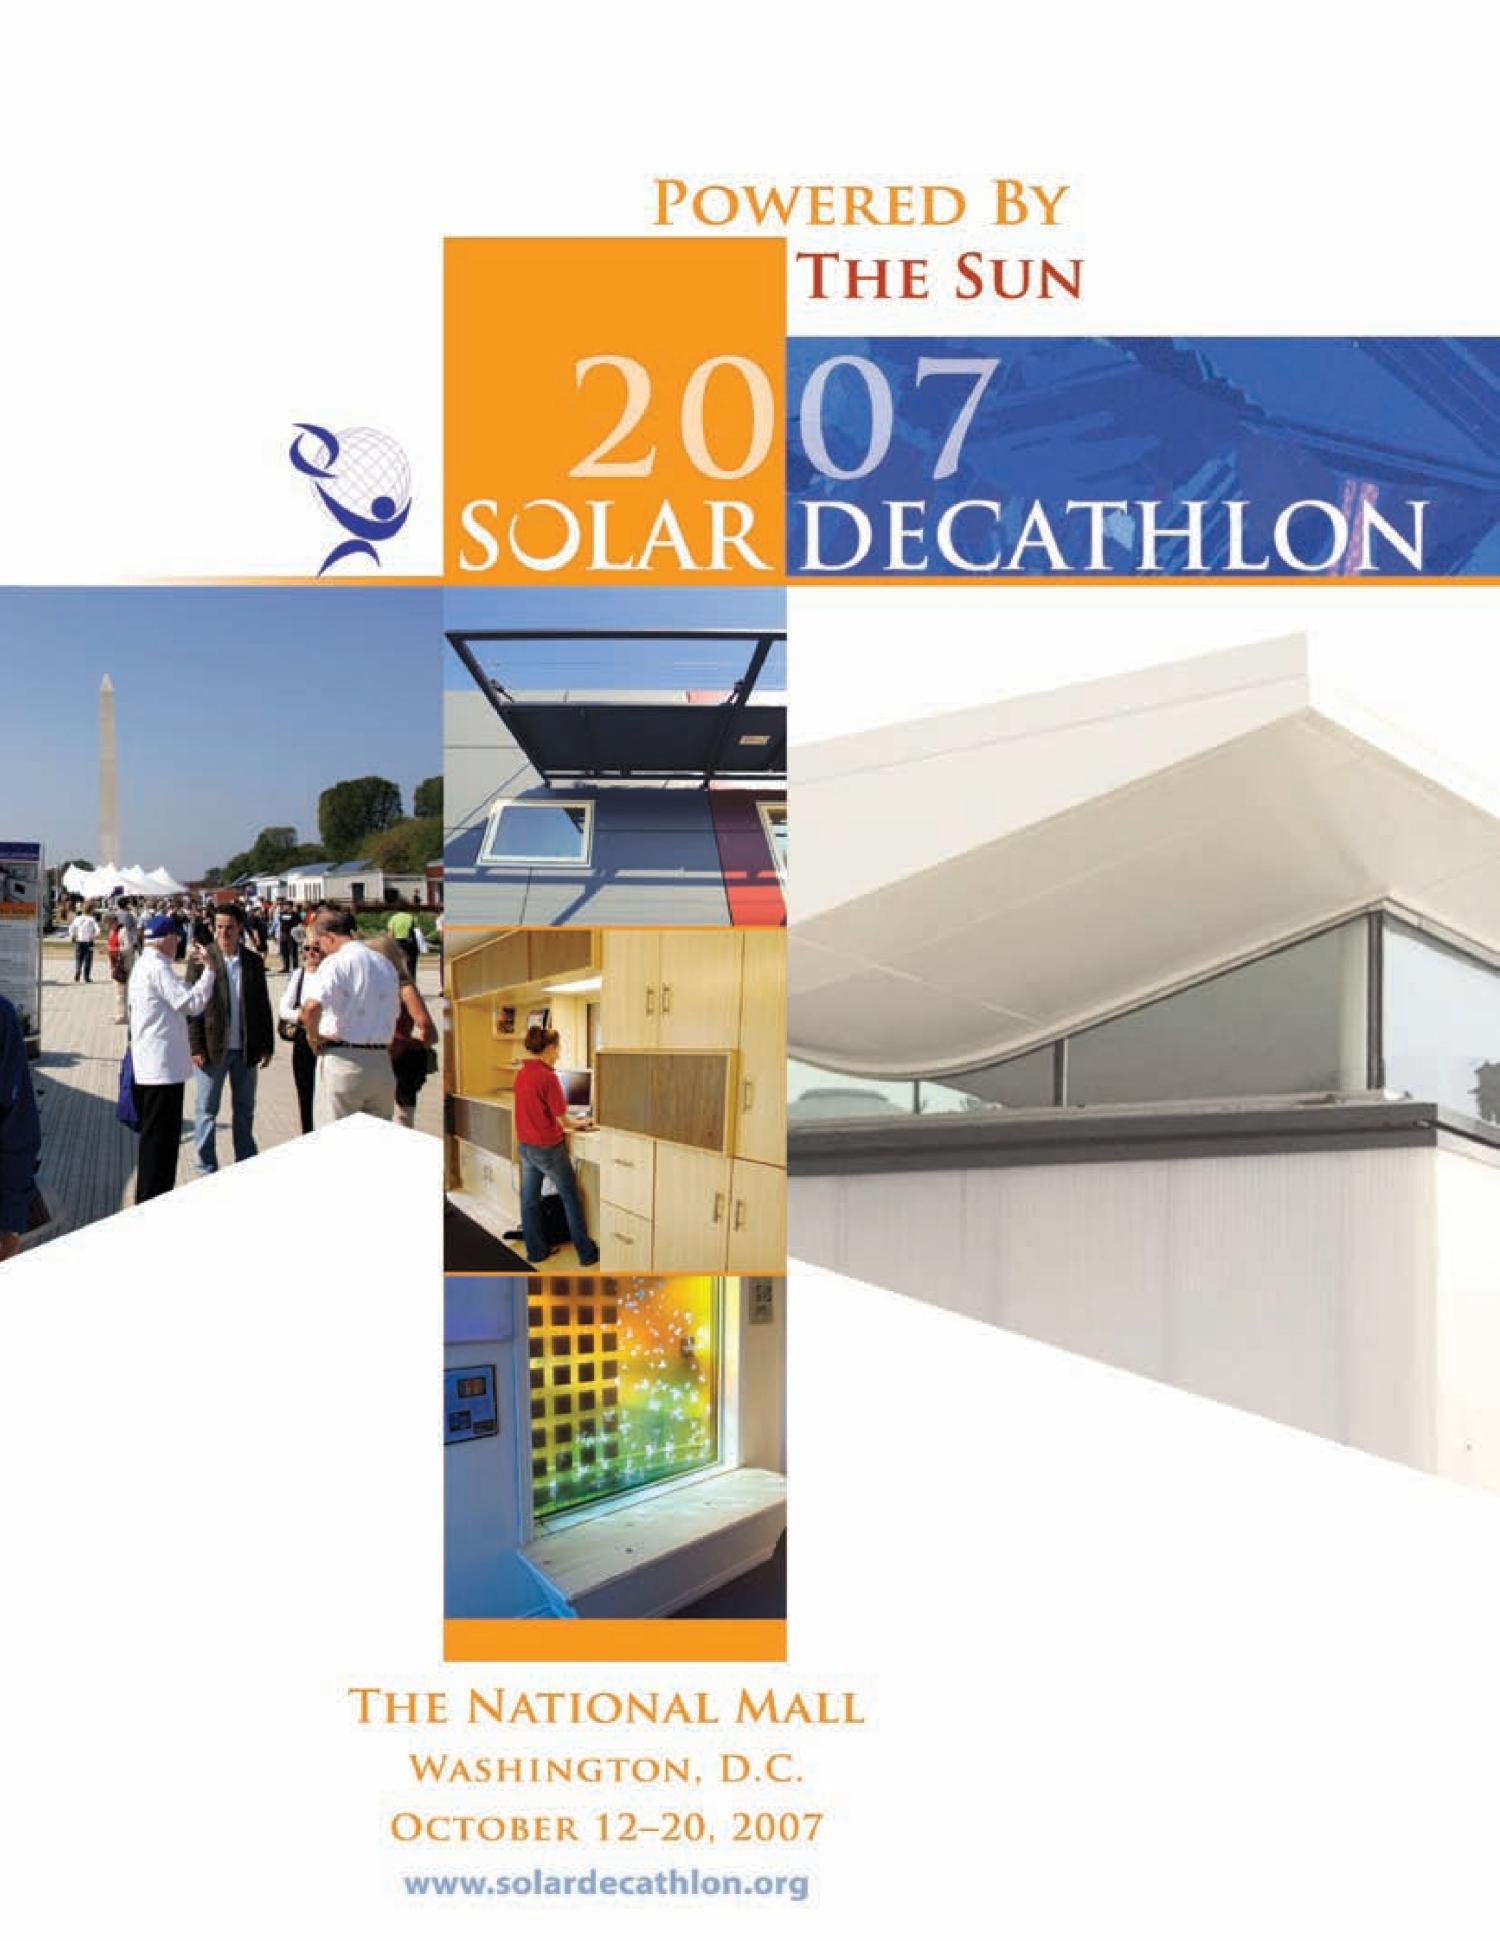 2007 Solar Decathlon: Powered by the Sun (Competition Program)
                                                
                                                    [Sequence #]: 1 of 40
                                                